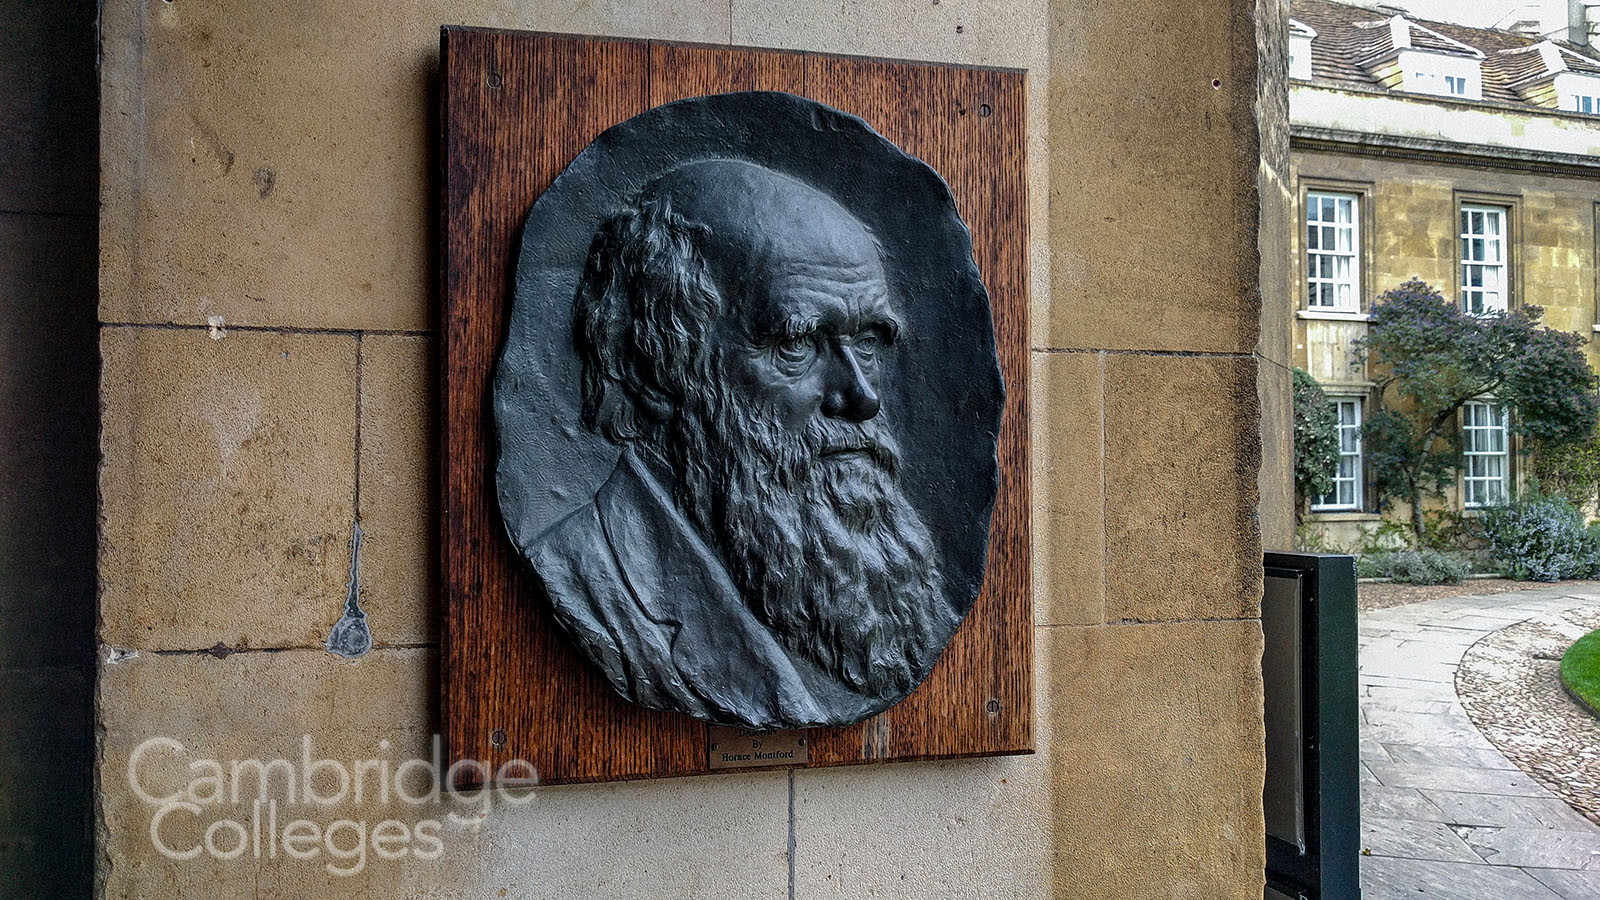 Charles Darwin watching over Christ's college